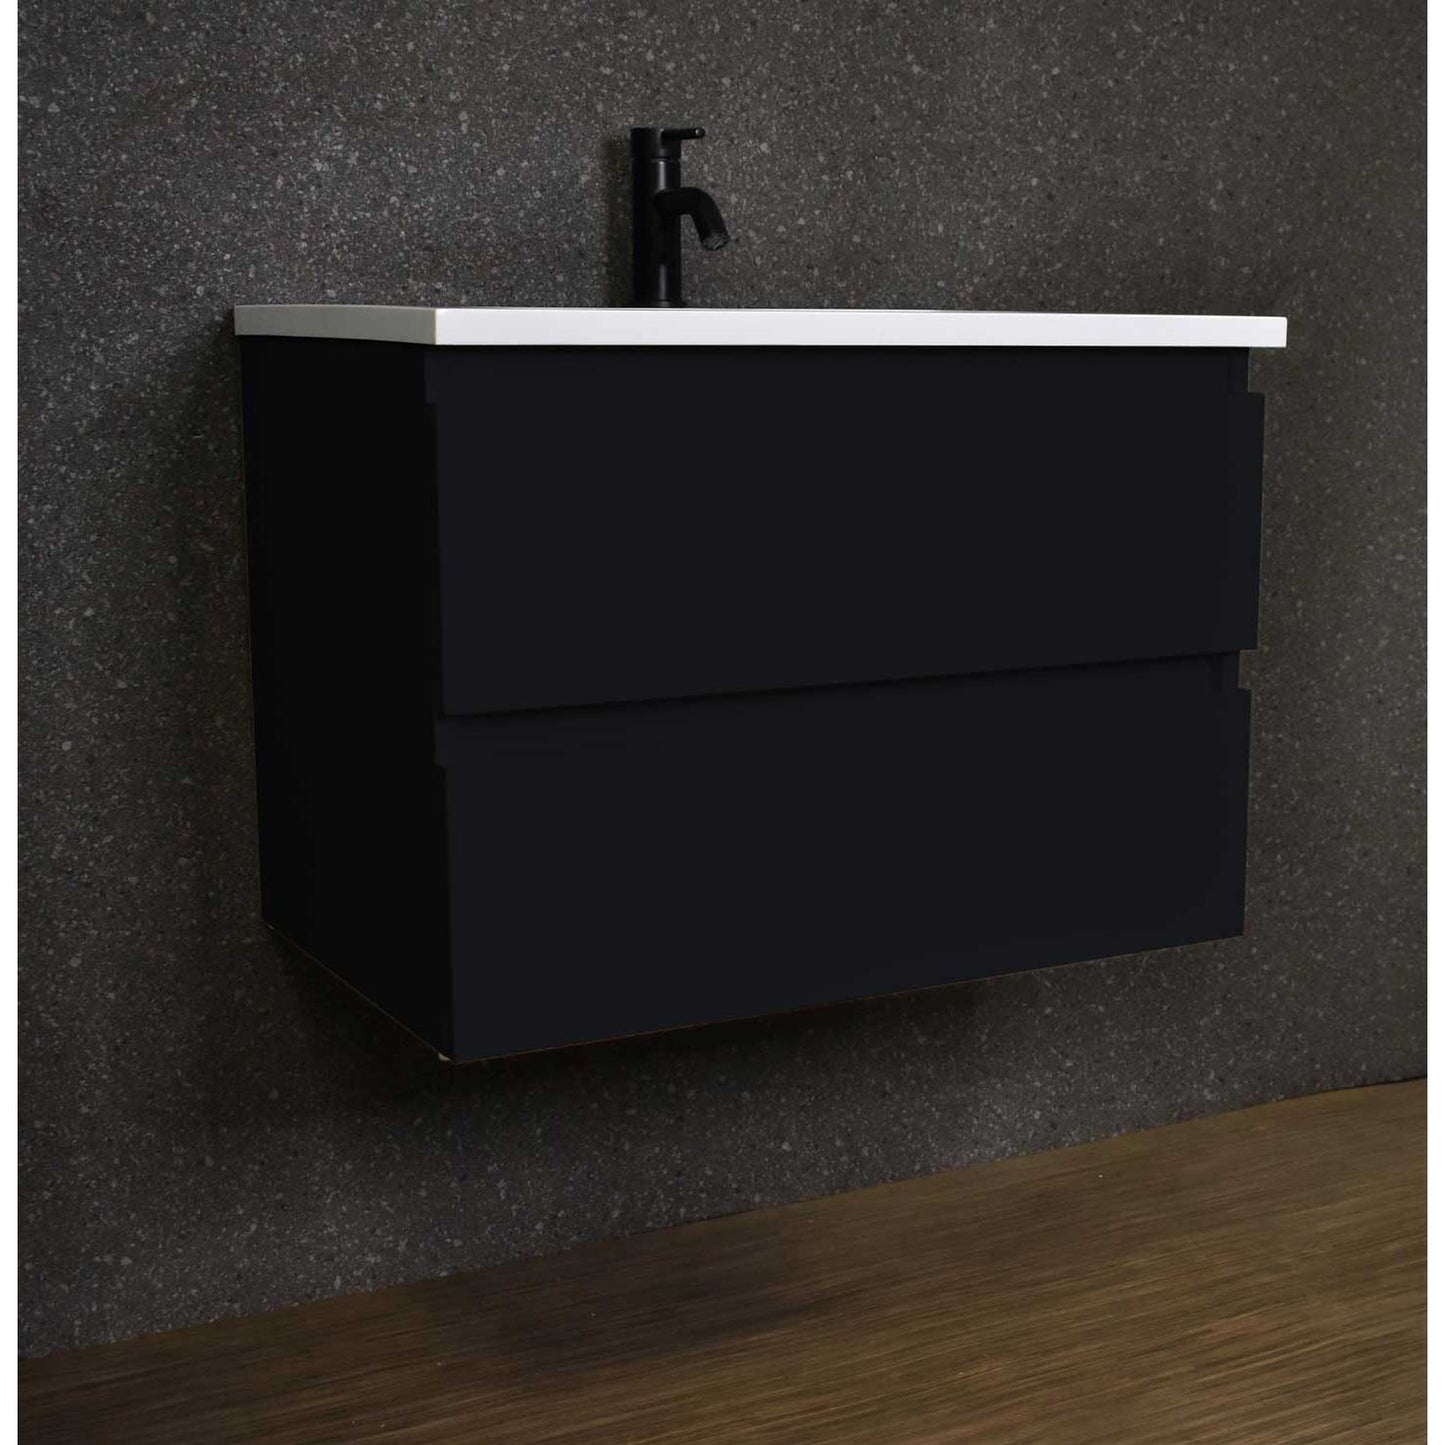 Volpa USA Salt 30" x 20" Glossy Black Wall-Mounted Floating Bathroom Vanity With Drawers, Acrylic Top and Integrated Acrylic Sink